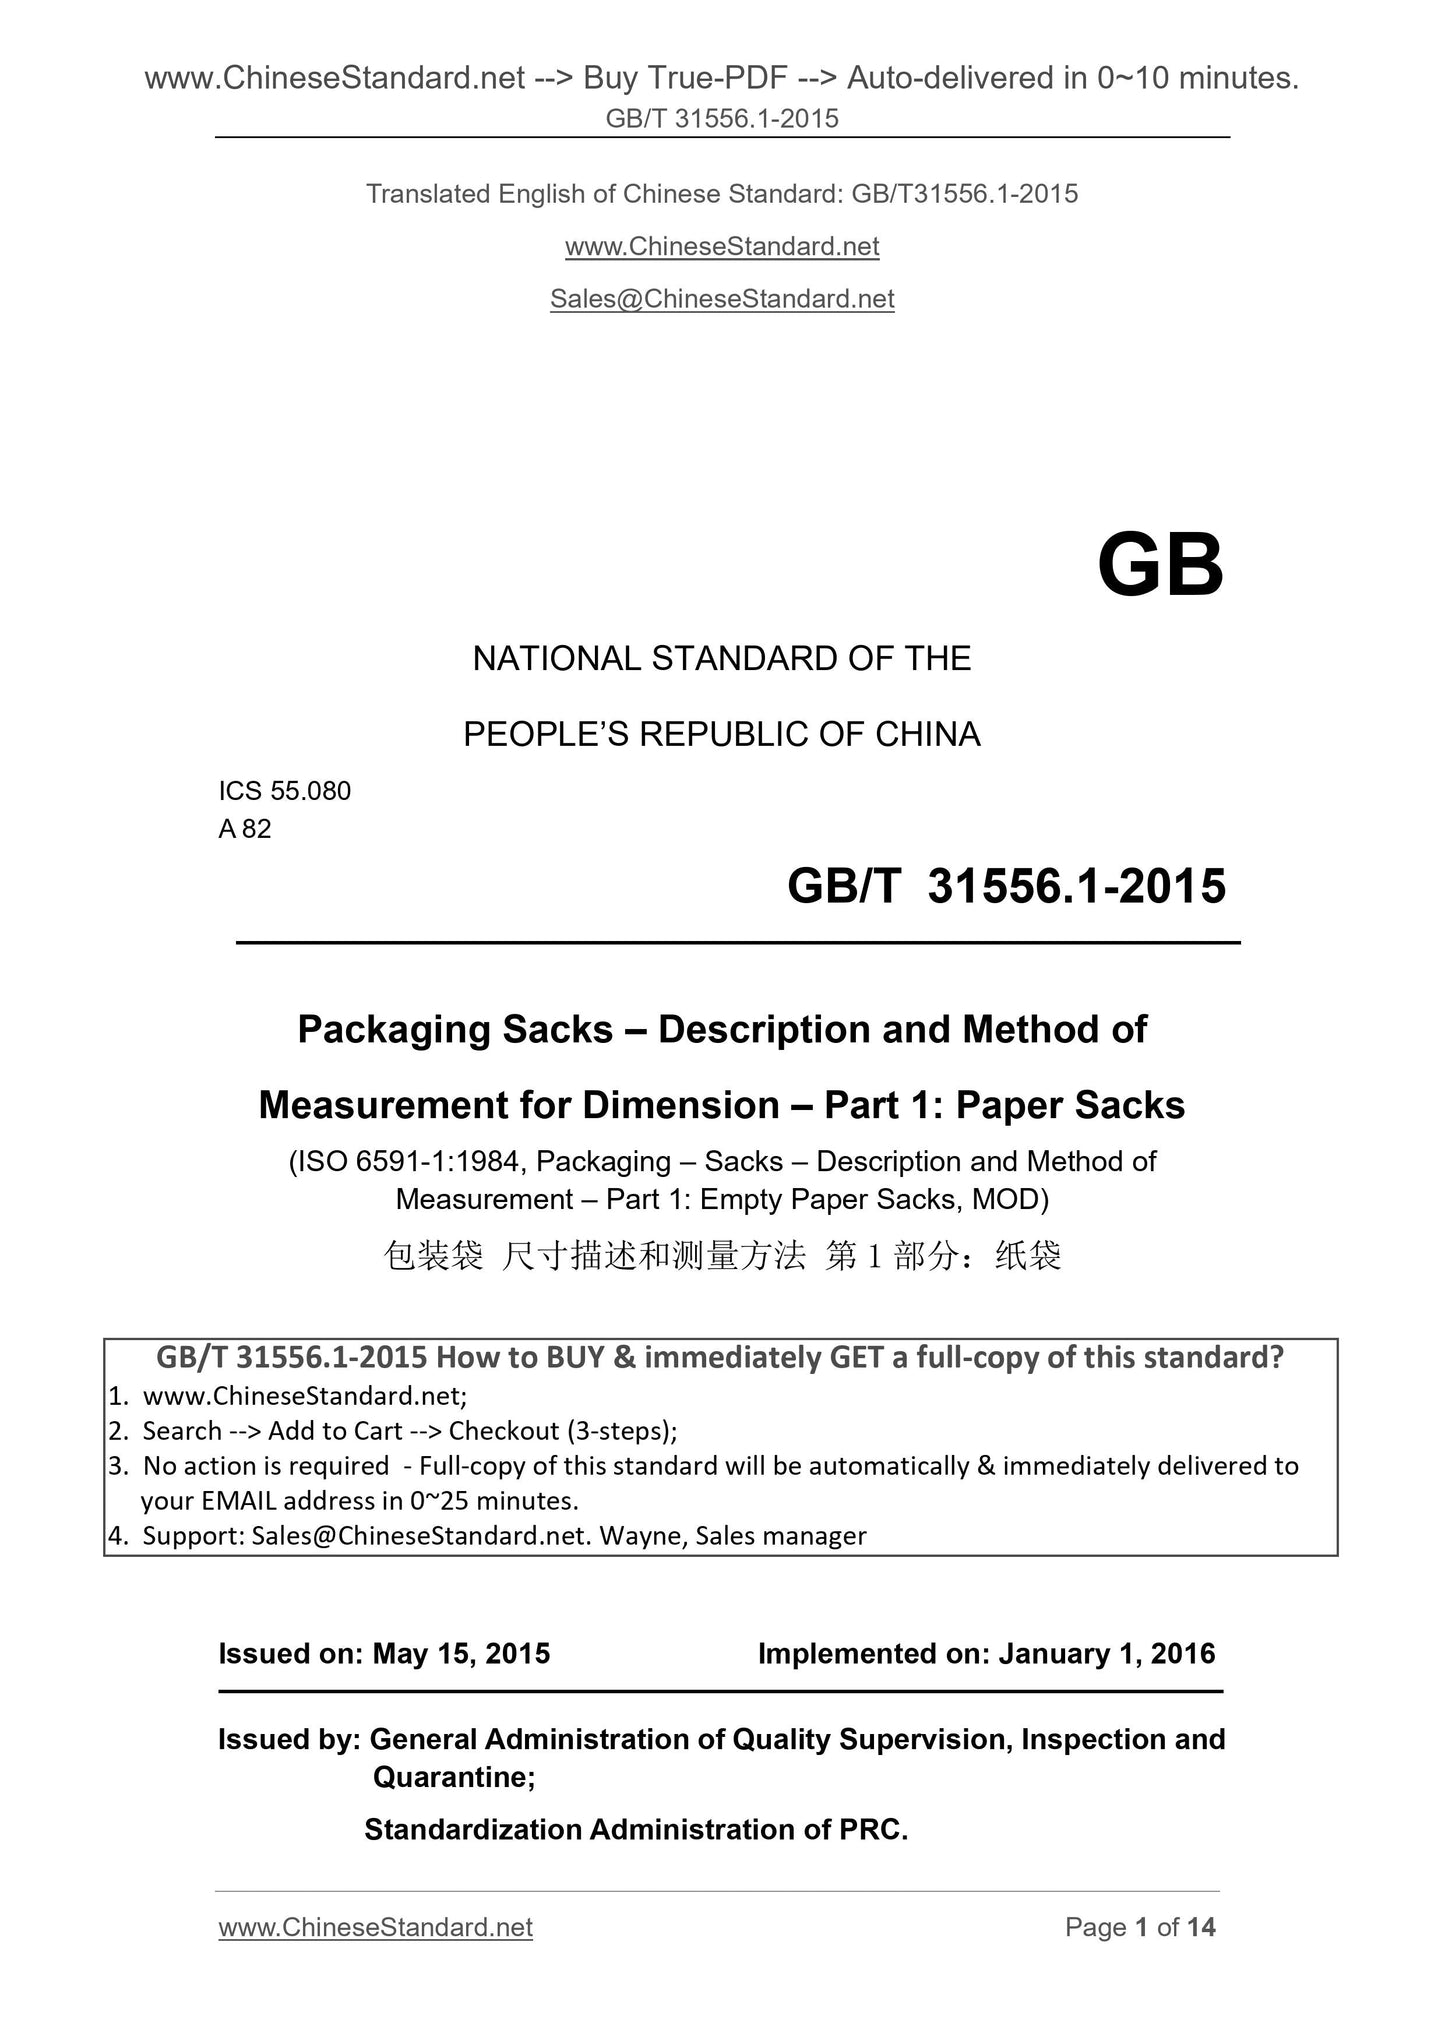 GB/T 31556.1-2015 Page 1